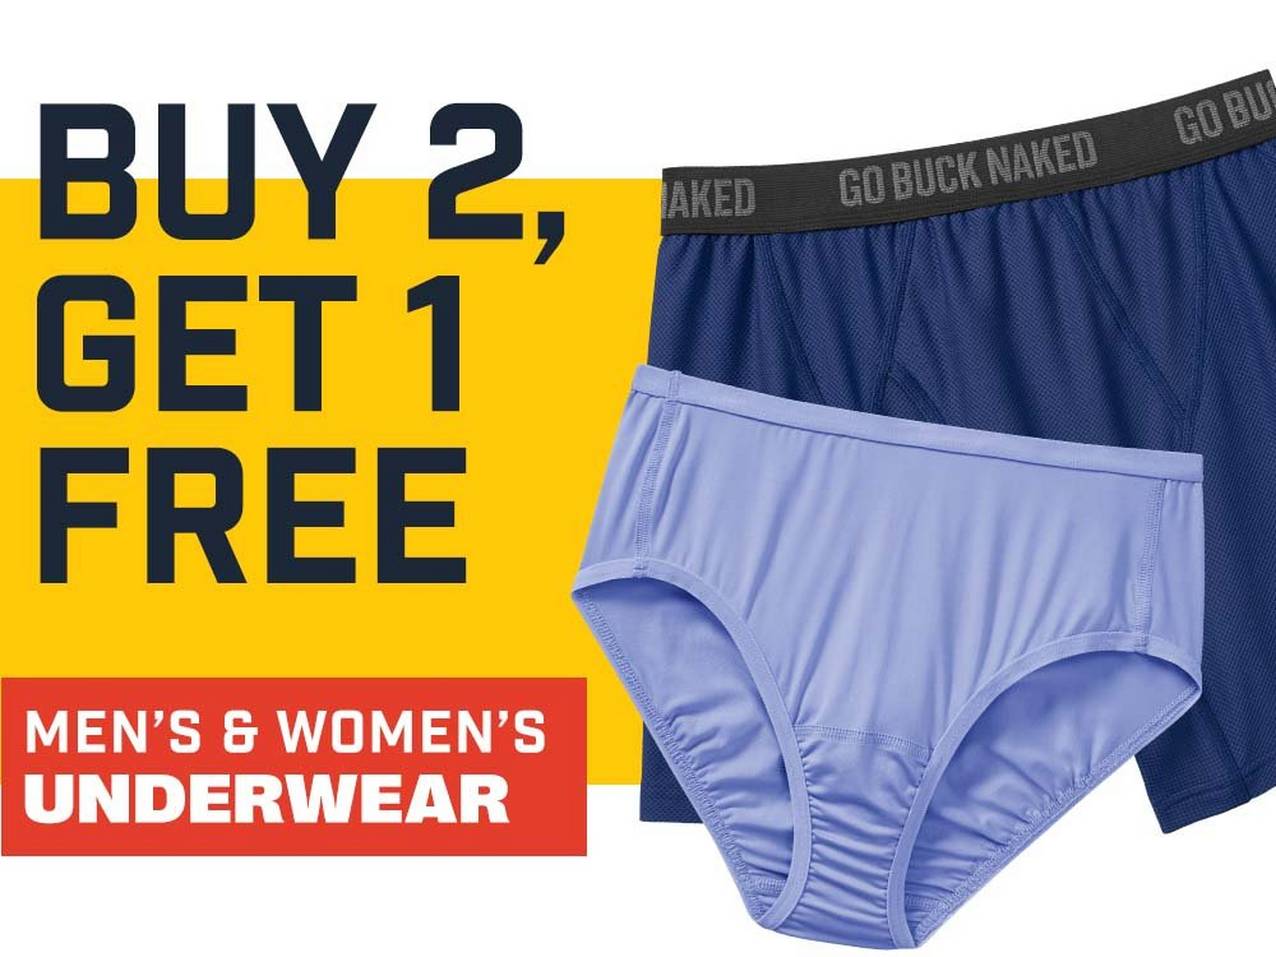 buy two get one free, men's and women's underwear